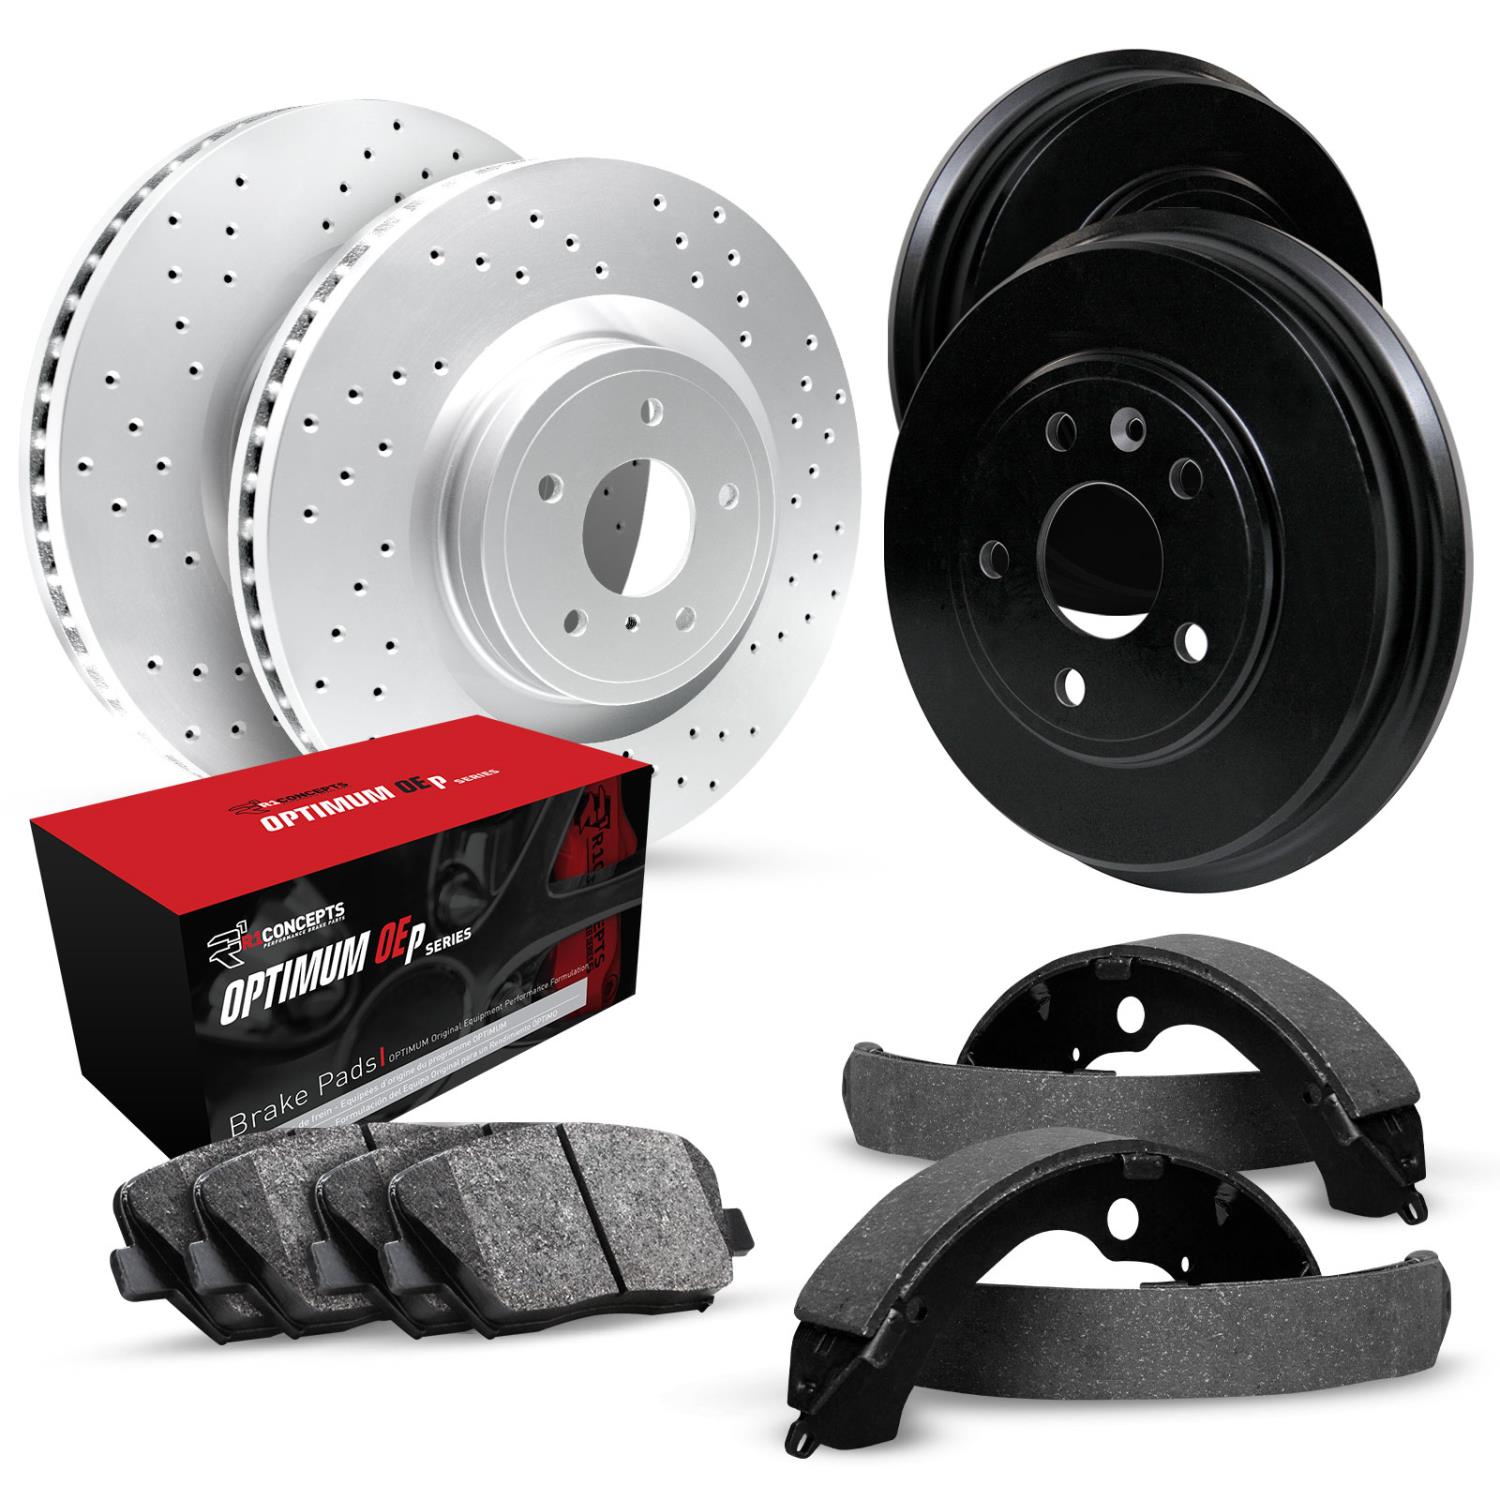 GEO-Carbon Drilled Brake Rotor & Drum Set w/Optimum OE Pads & Shoes, 1995-2000 GM, Position: Front & Rear